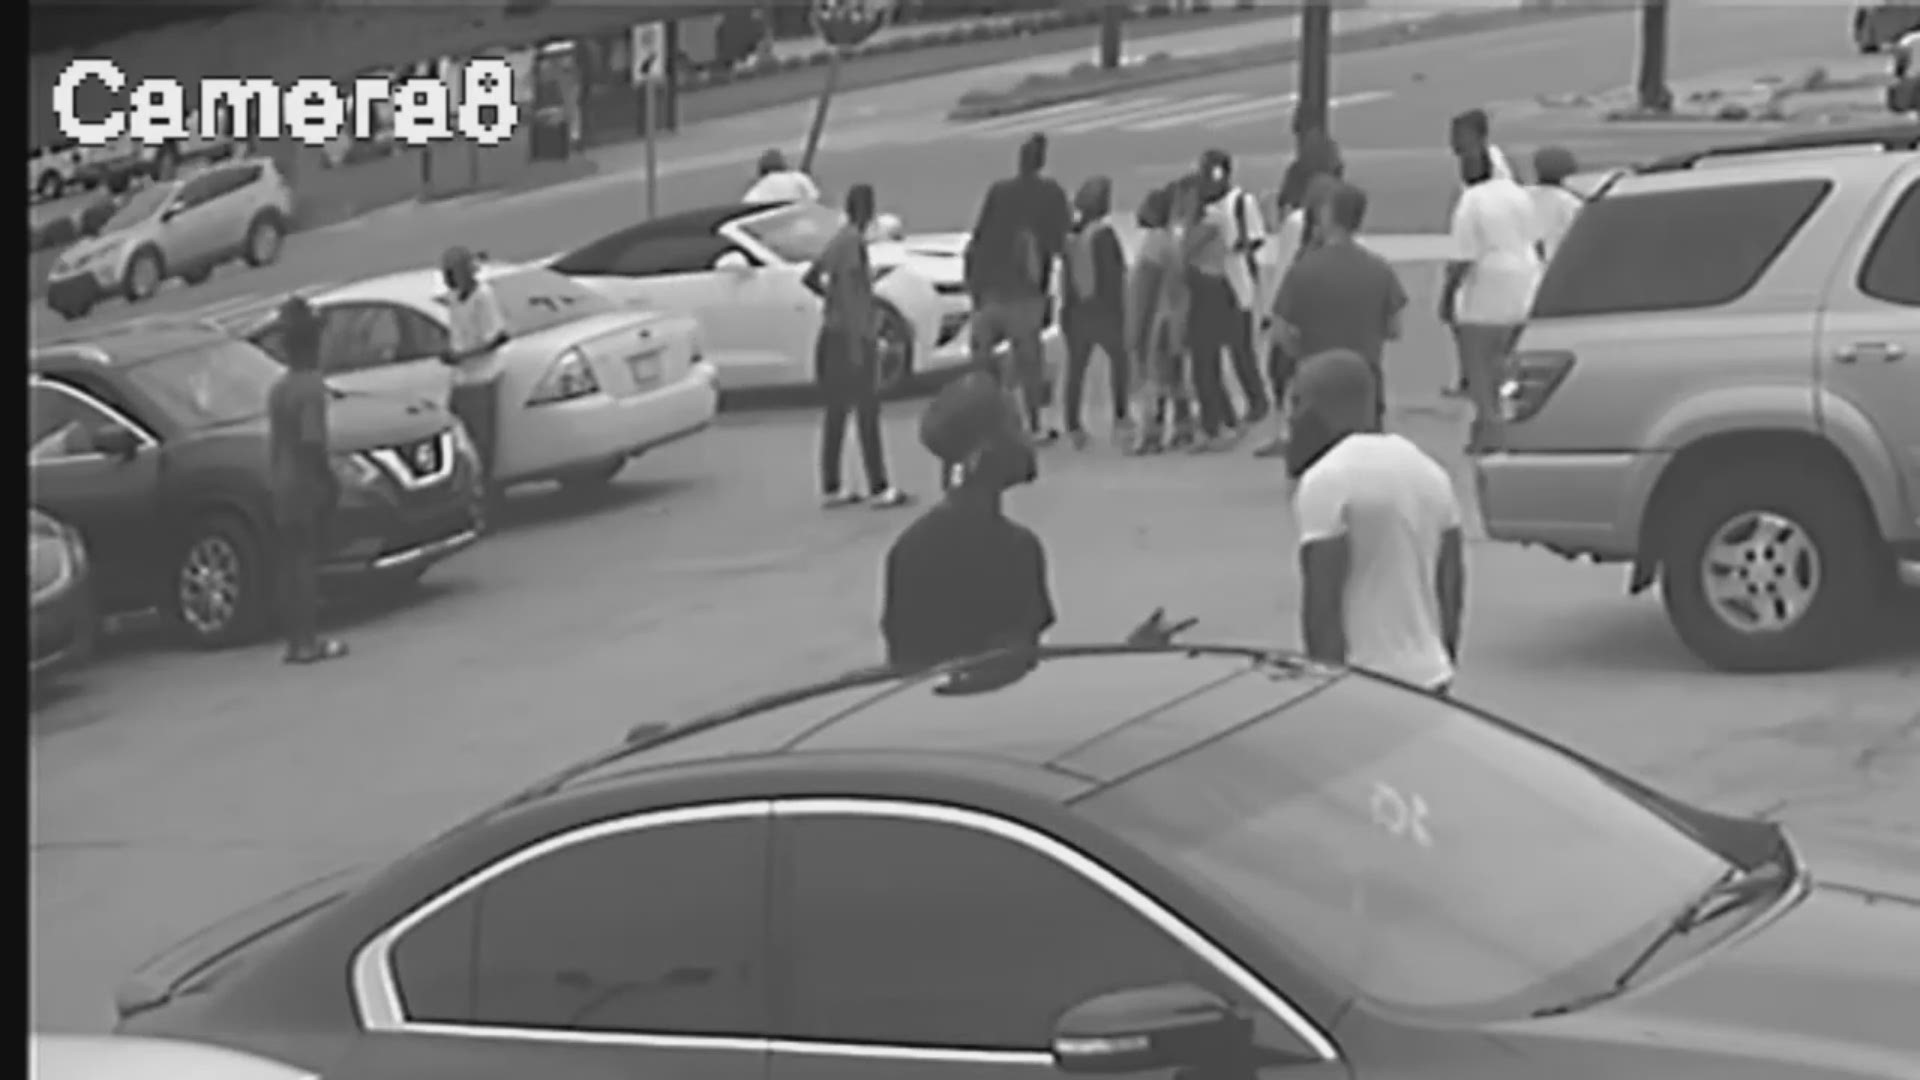 The video shows an unidentified suspect run into a crowd of people and fire several shots from a rifle.